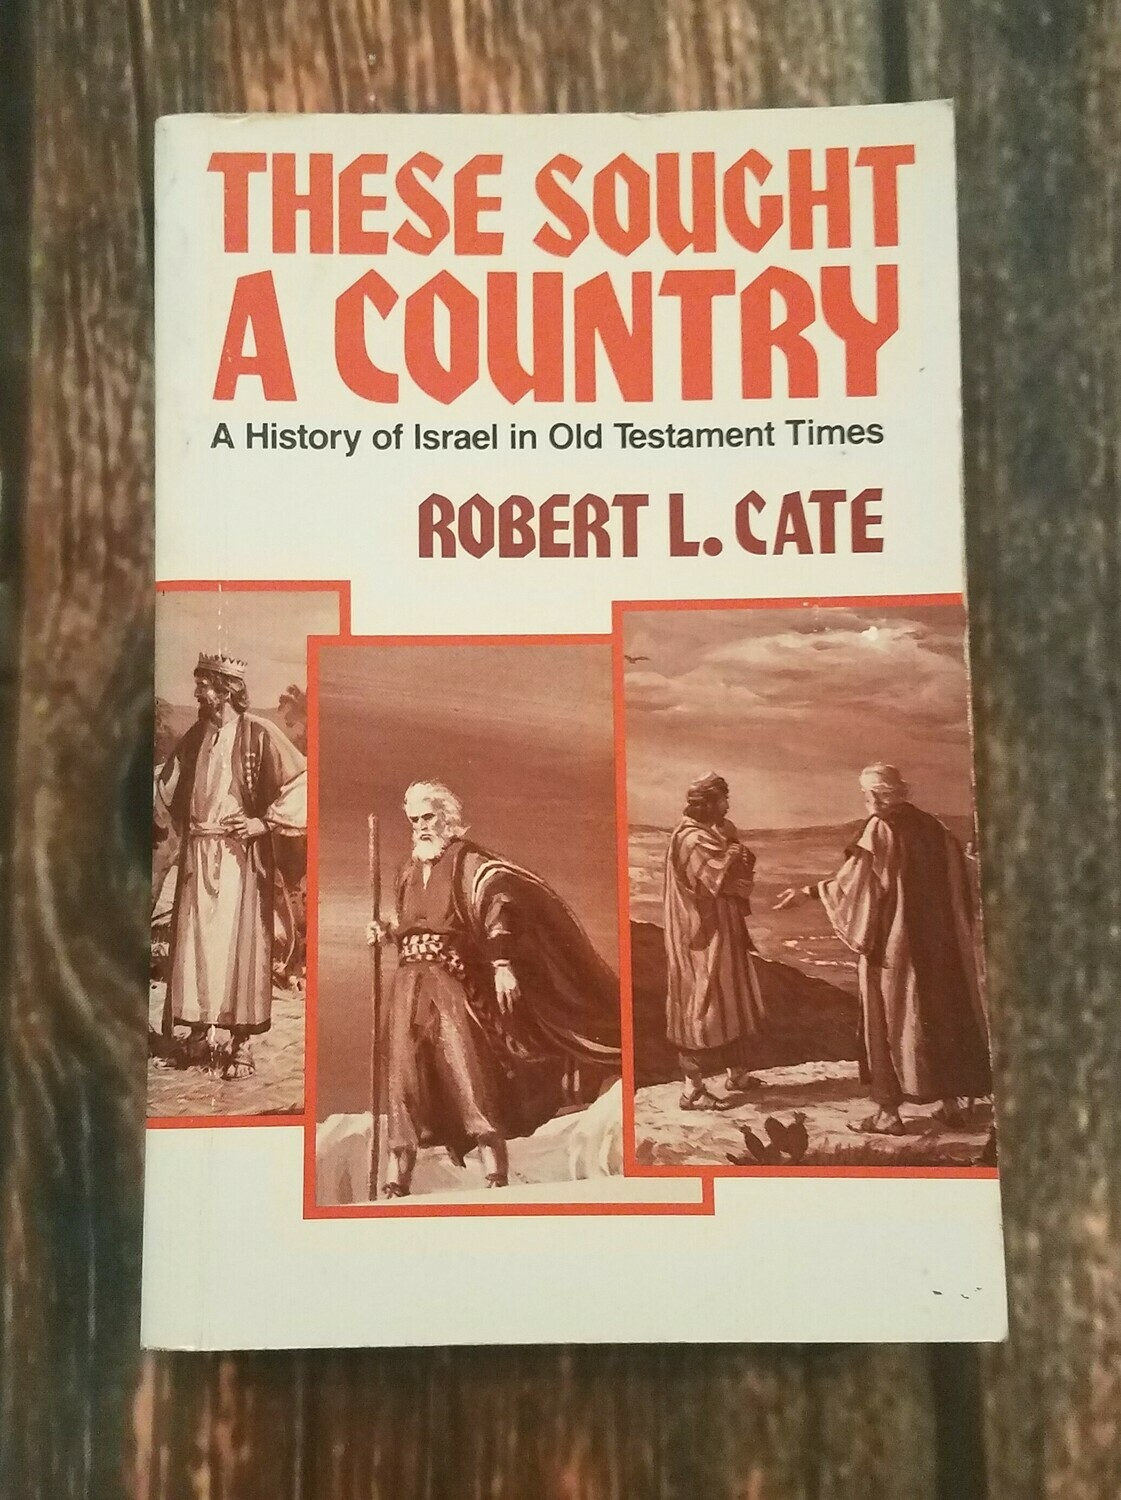 These Sought a Country by Robert L. Cate